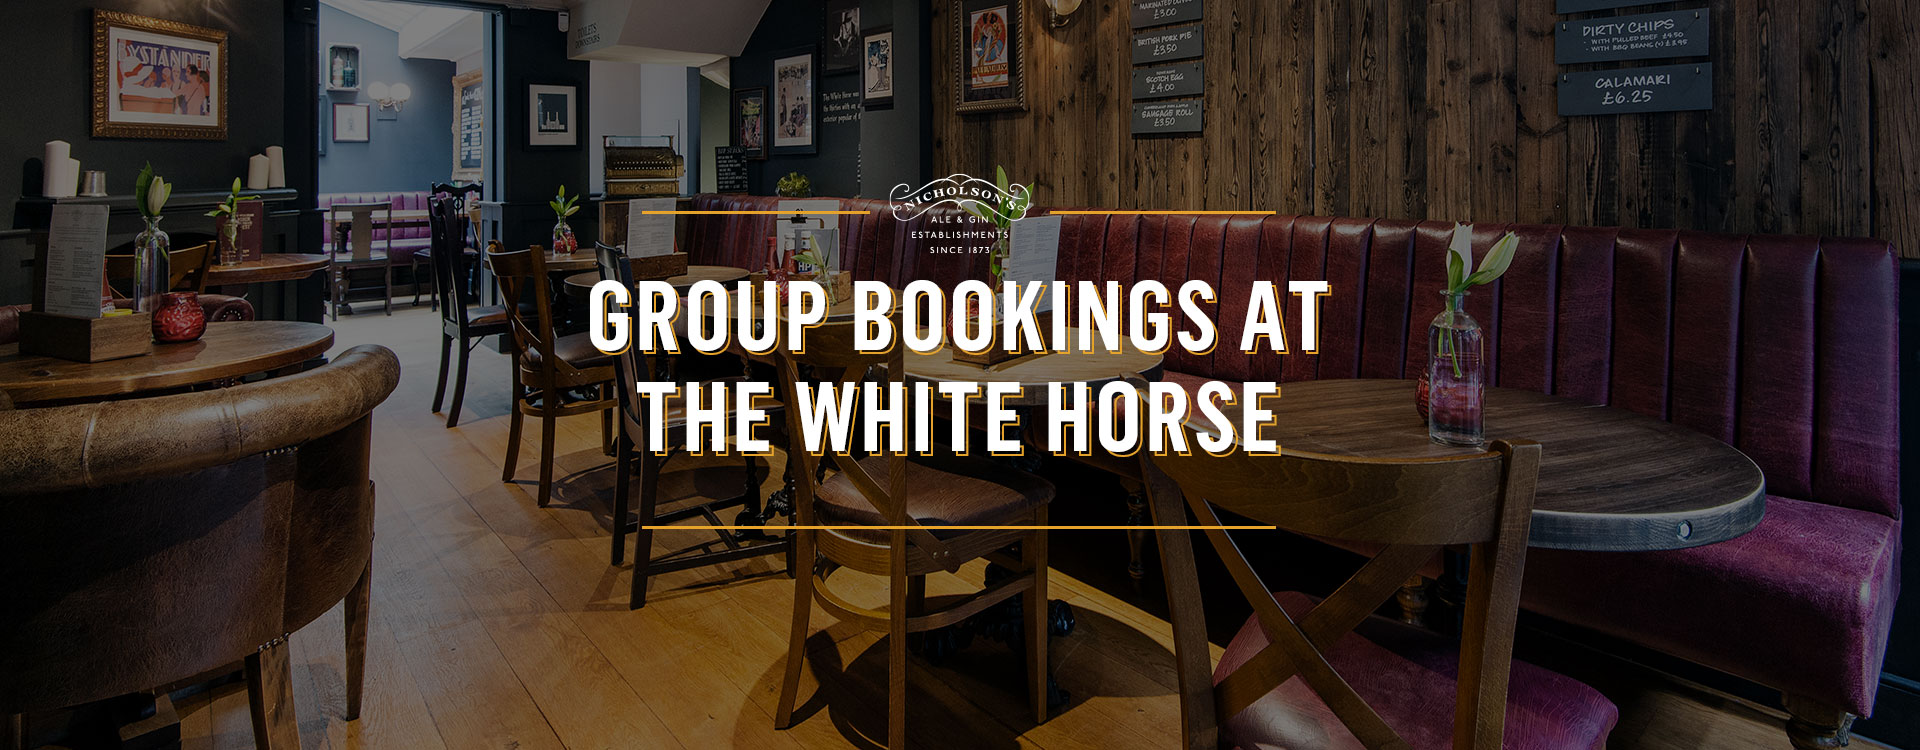 Group Bookings at The White Horse